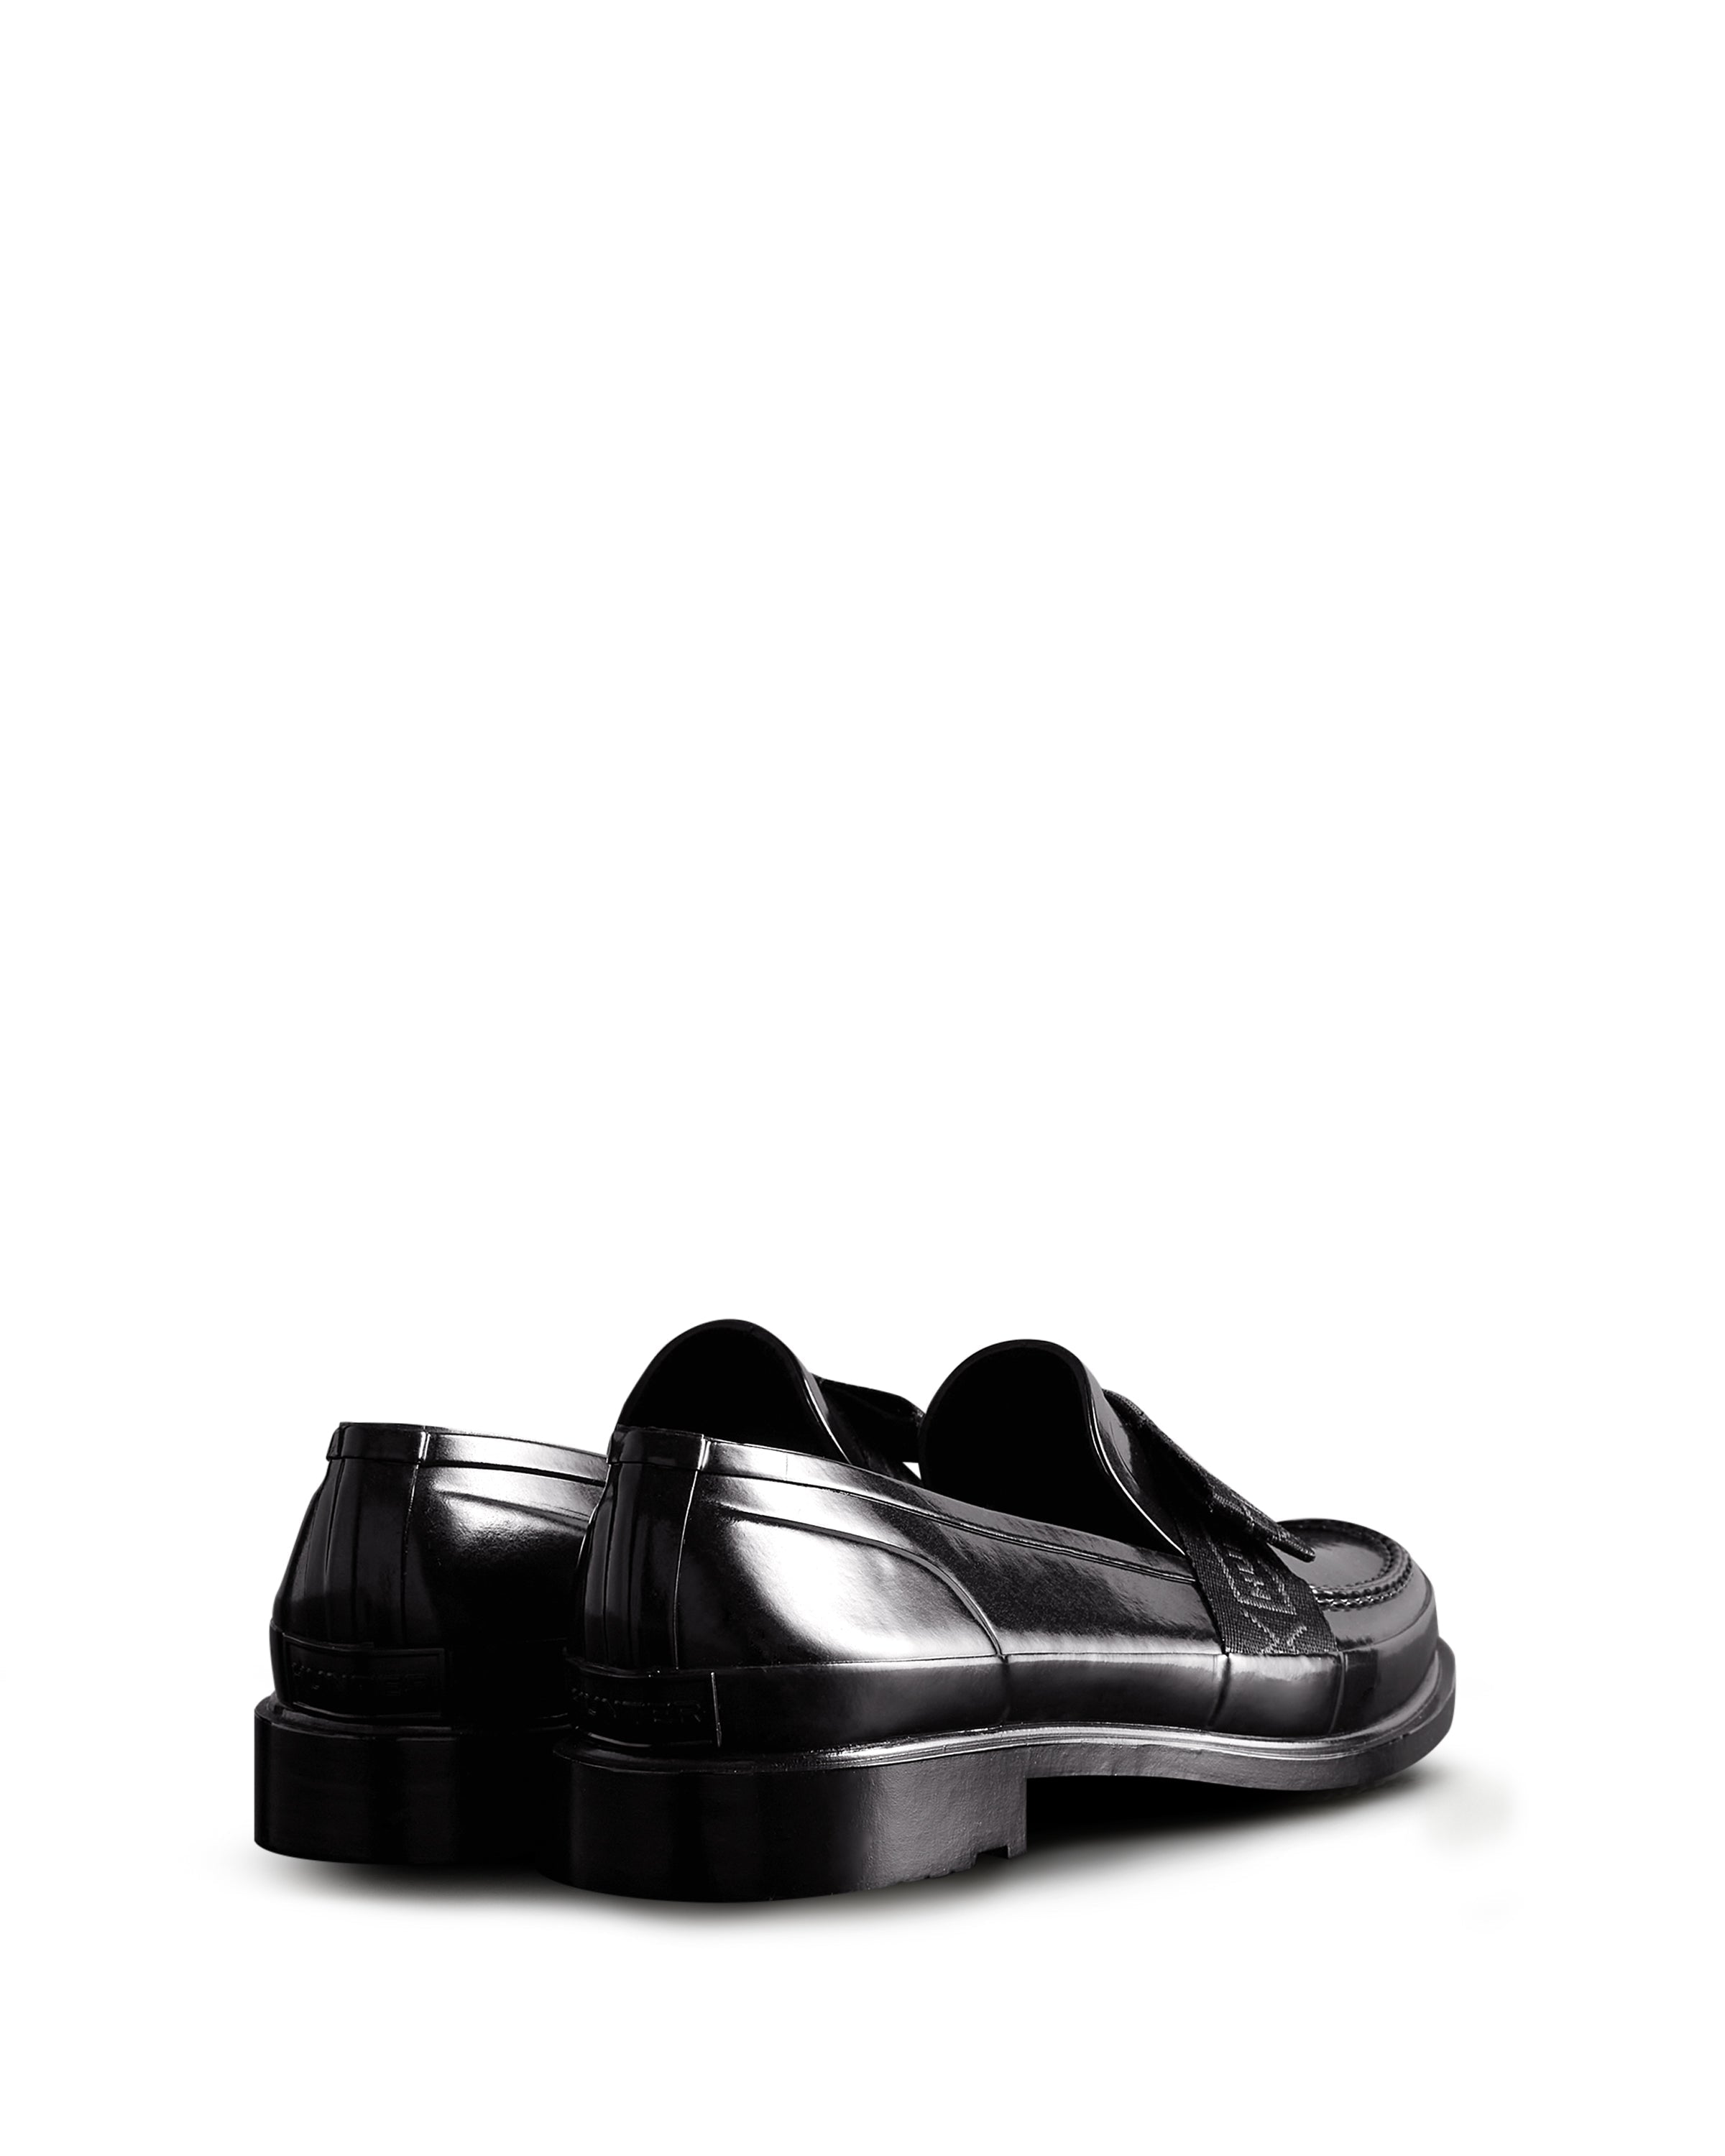 Women's Refined Bow Gloss Penny Loafer - Black